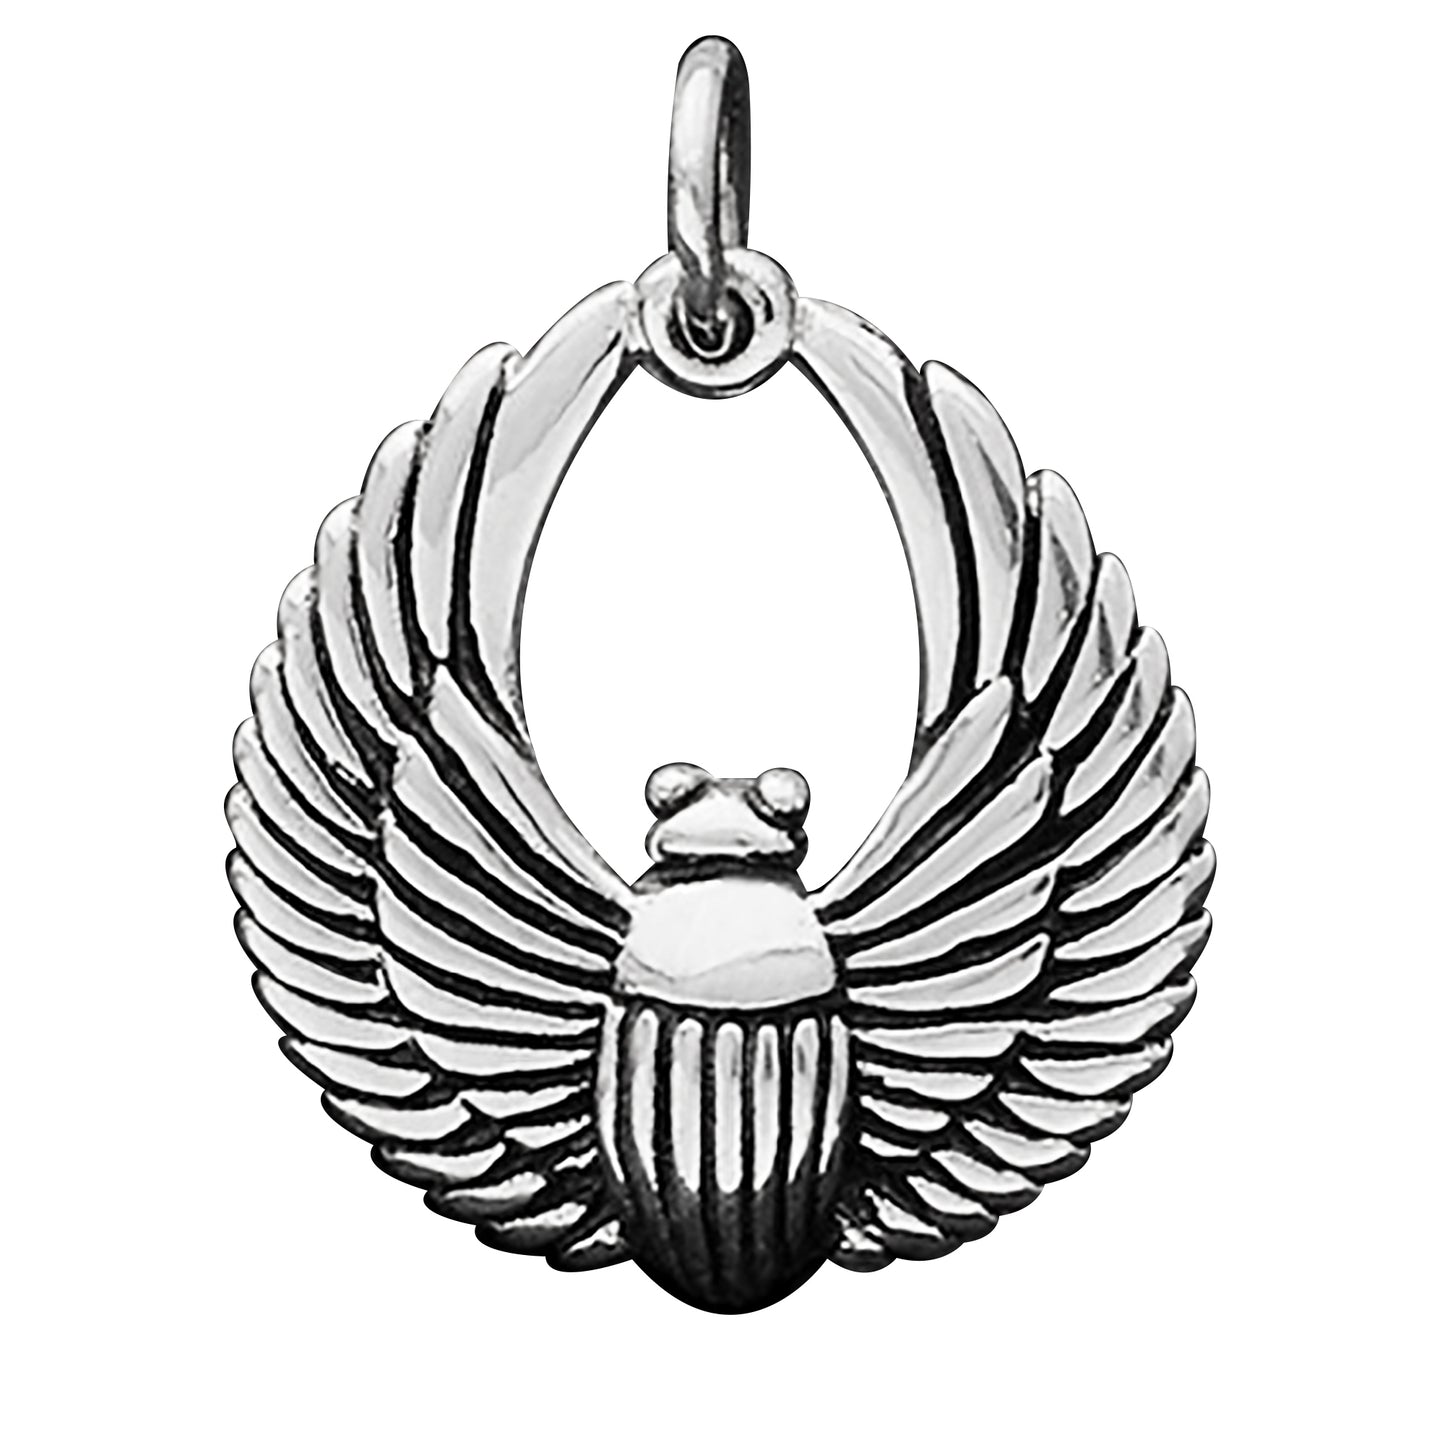 Egyptian Scarab Beetle Charm Sterling Silver Pendant